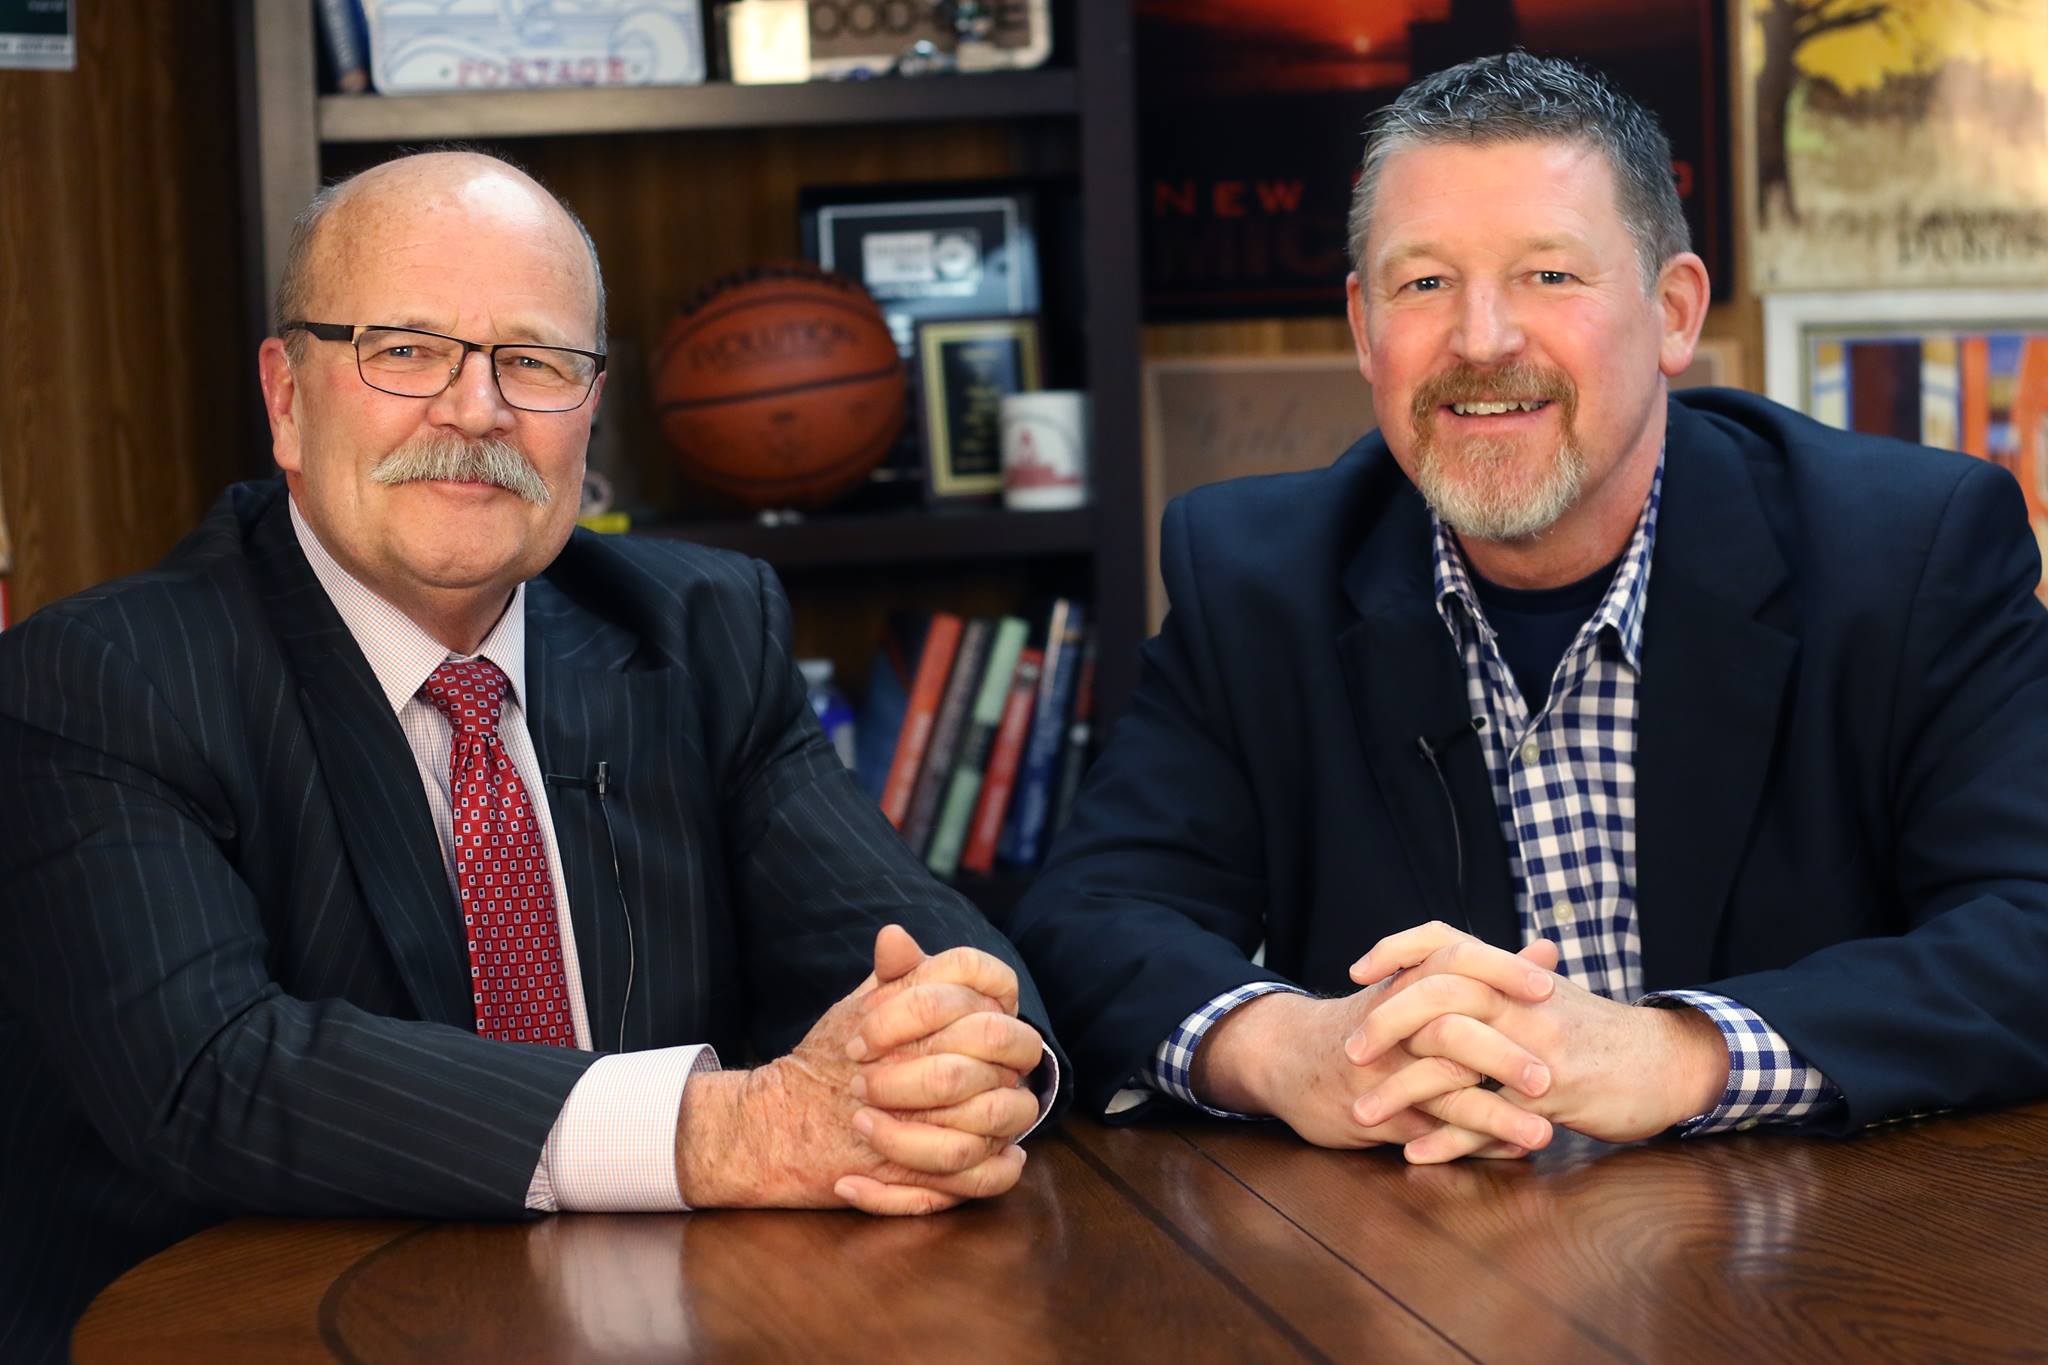 Ideas in Motion Media Welcomes John Gregg for Roundtable Interview on Upcoming Election